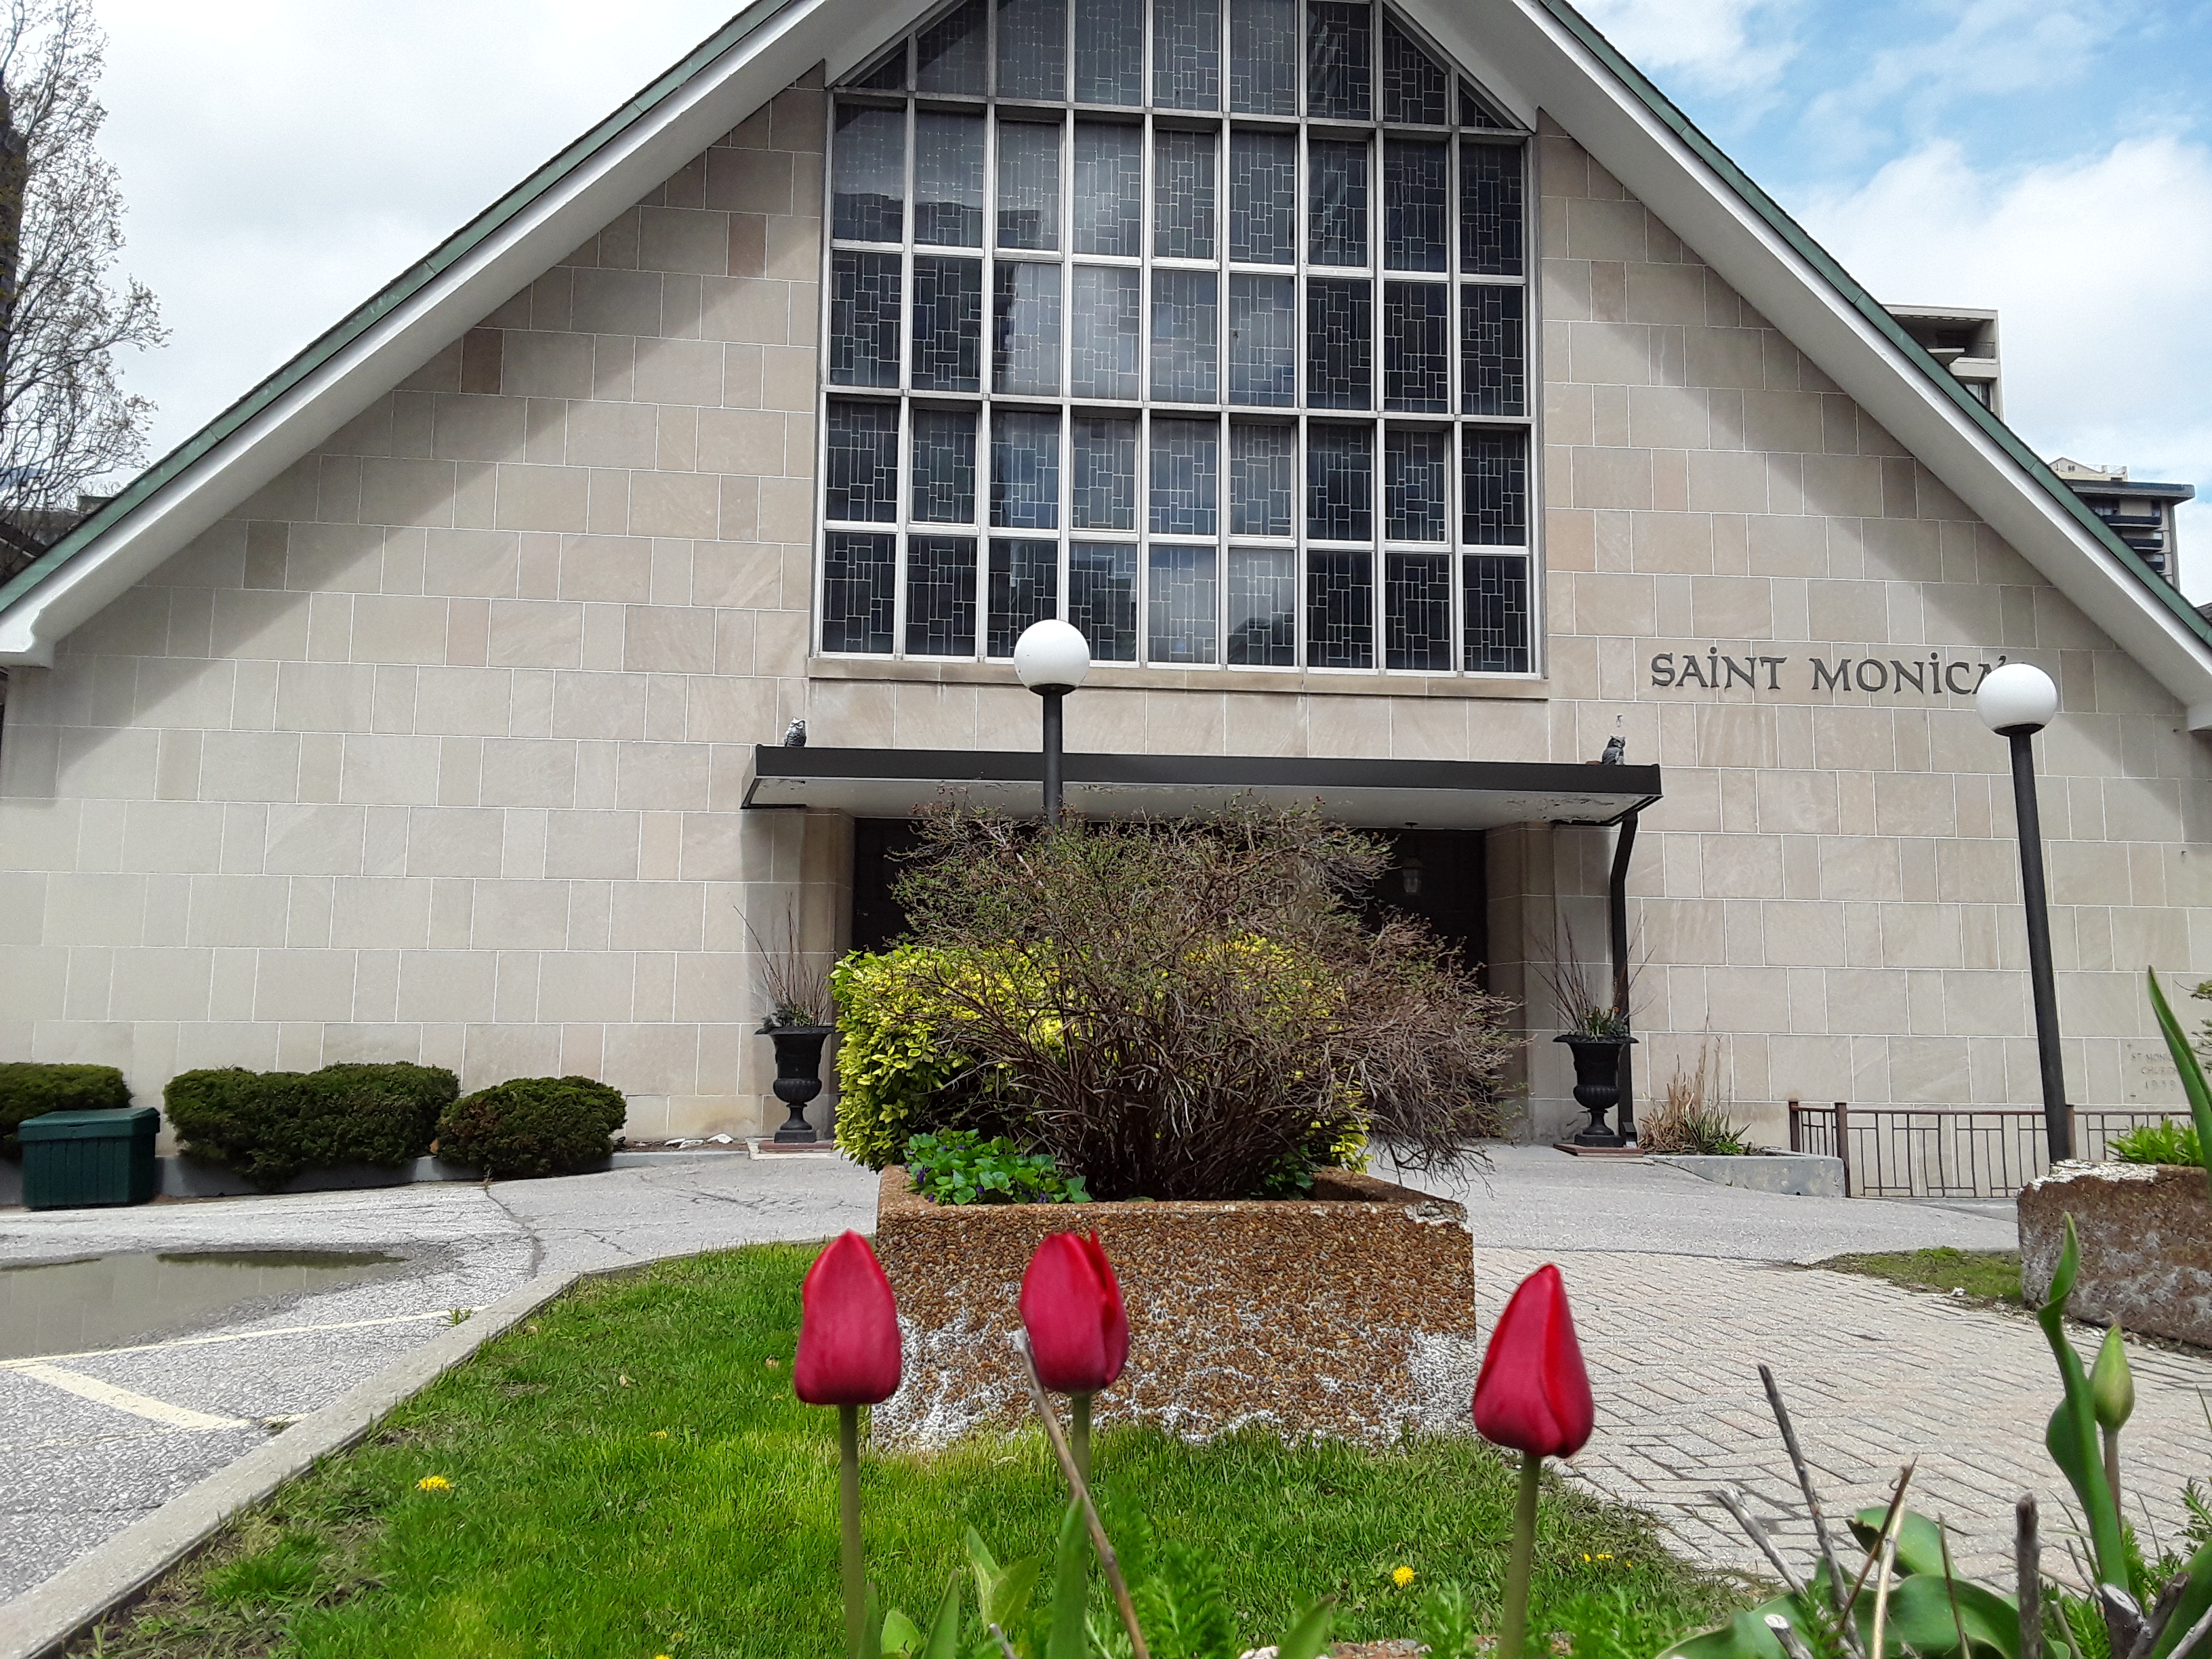 Picture of church building with red tulips in foreground